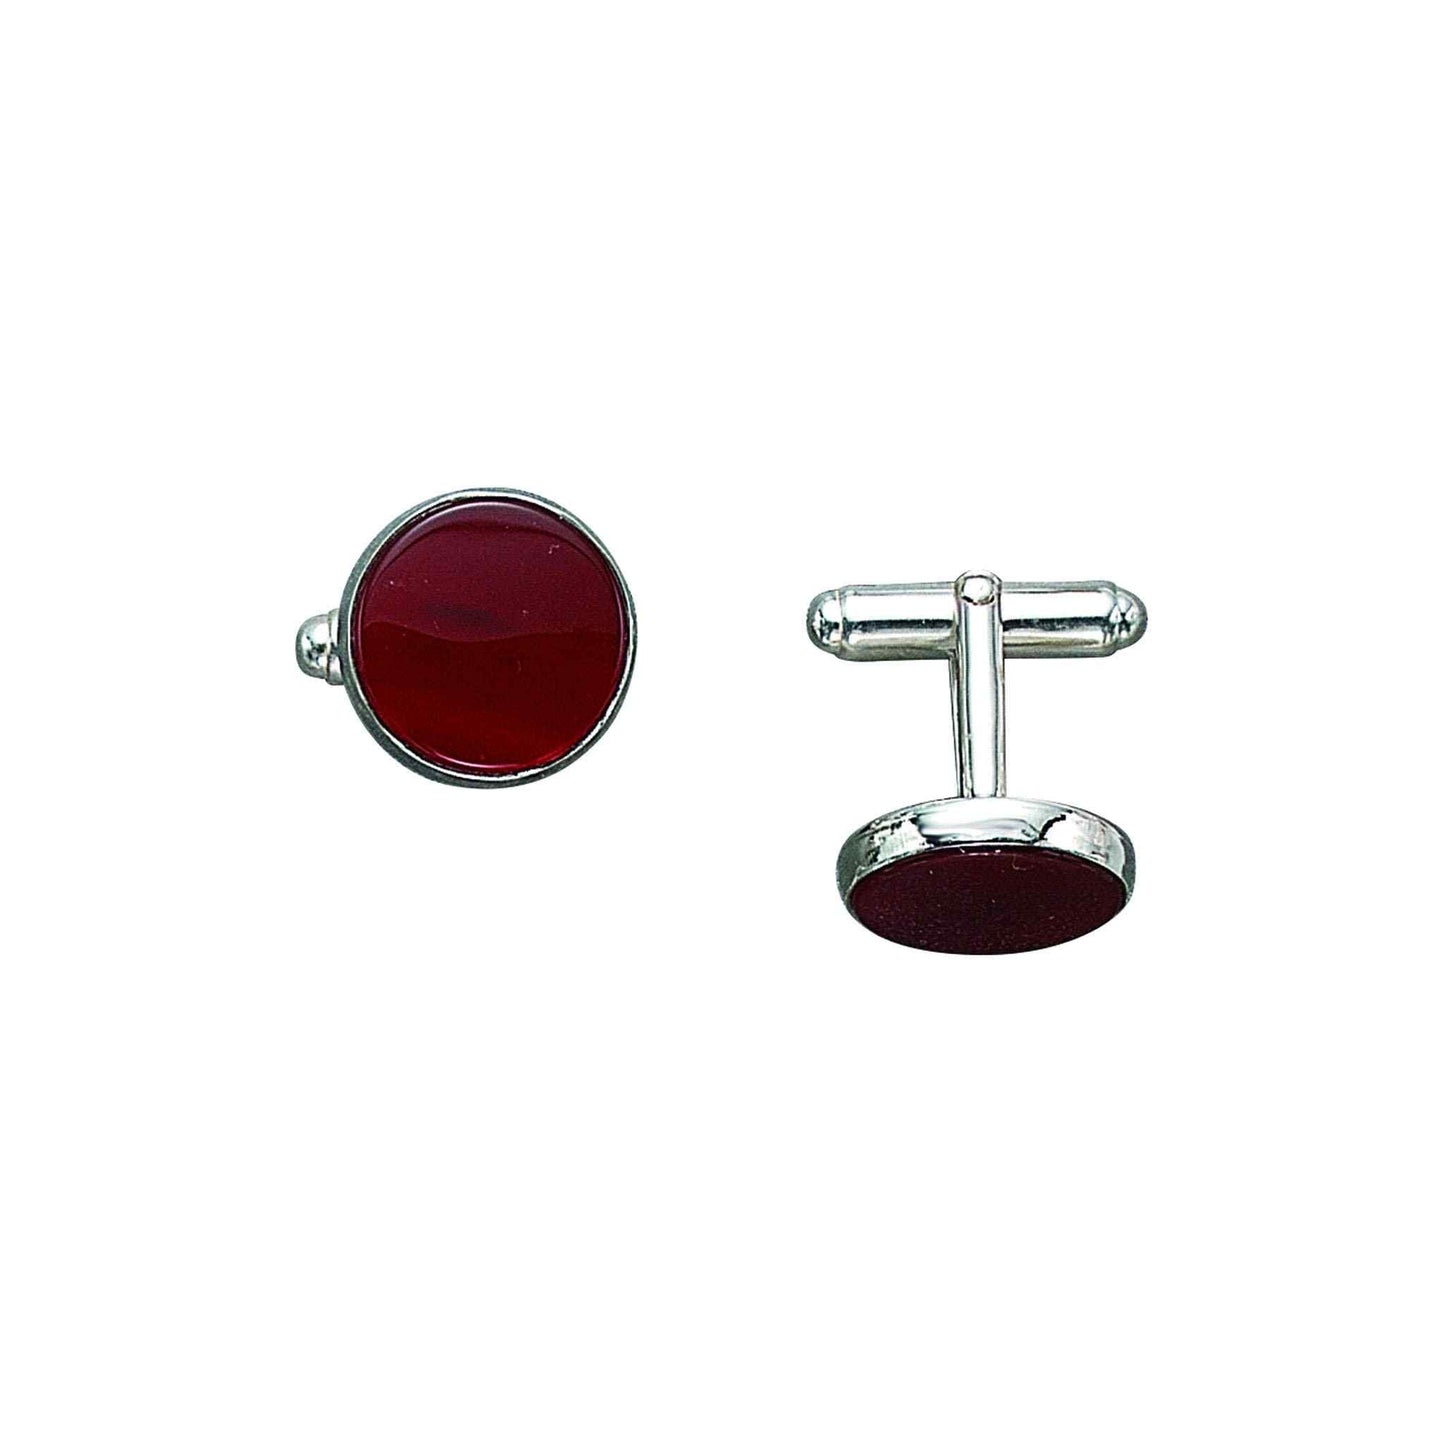 A sterling silver round cufflinks with carnelian stone displayed on a neutral white background.